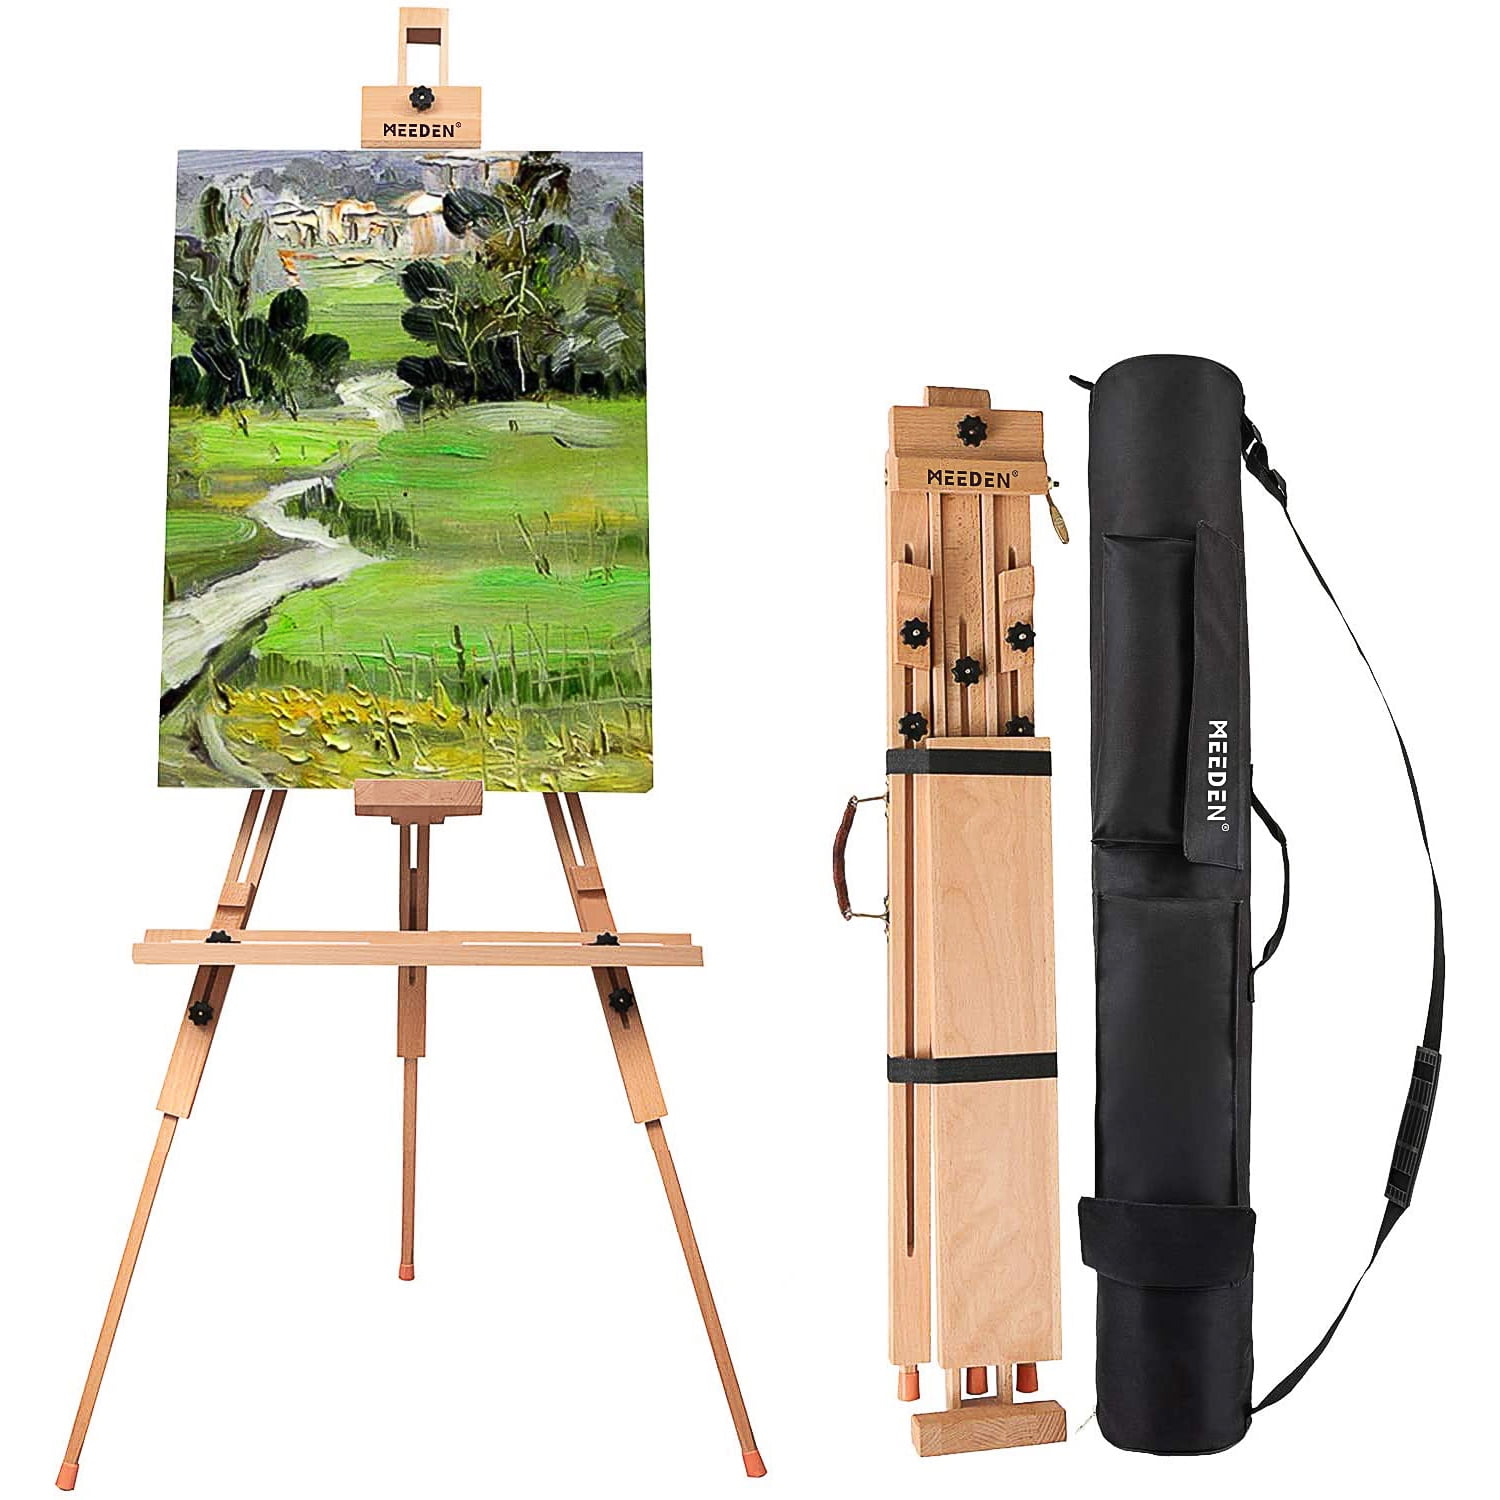 MEEDEN Easel Stand for Display, 64 inch Wooden Tripod Artist Floor Easel for Wedding Sign, Display Easel Stand for Posters, Signs, Pictures, Walnut